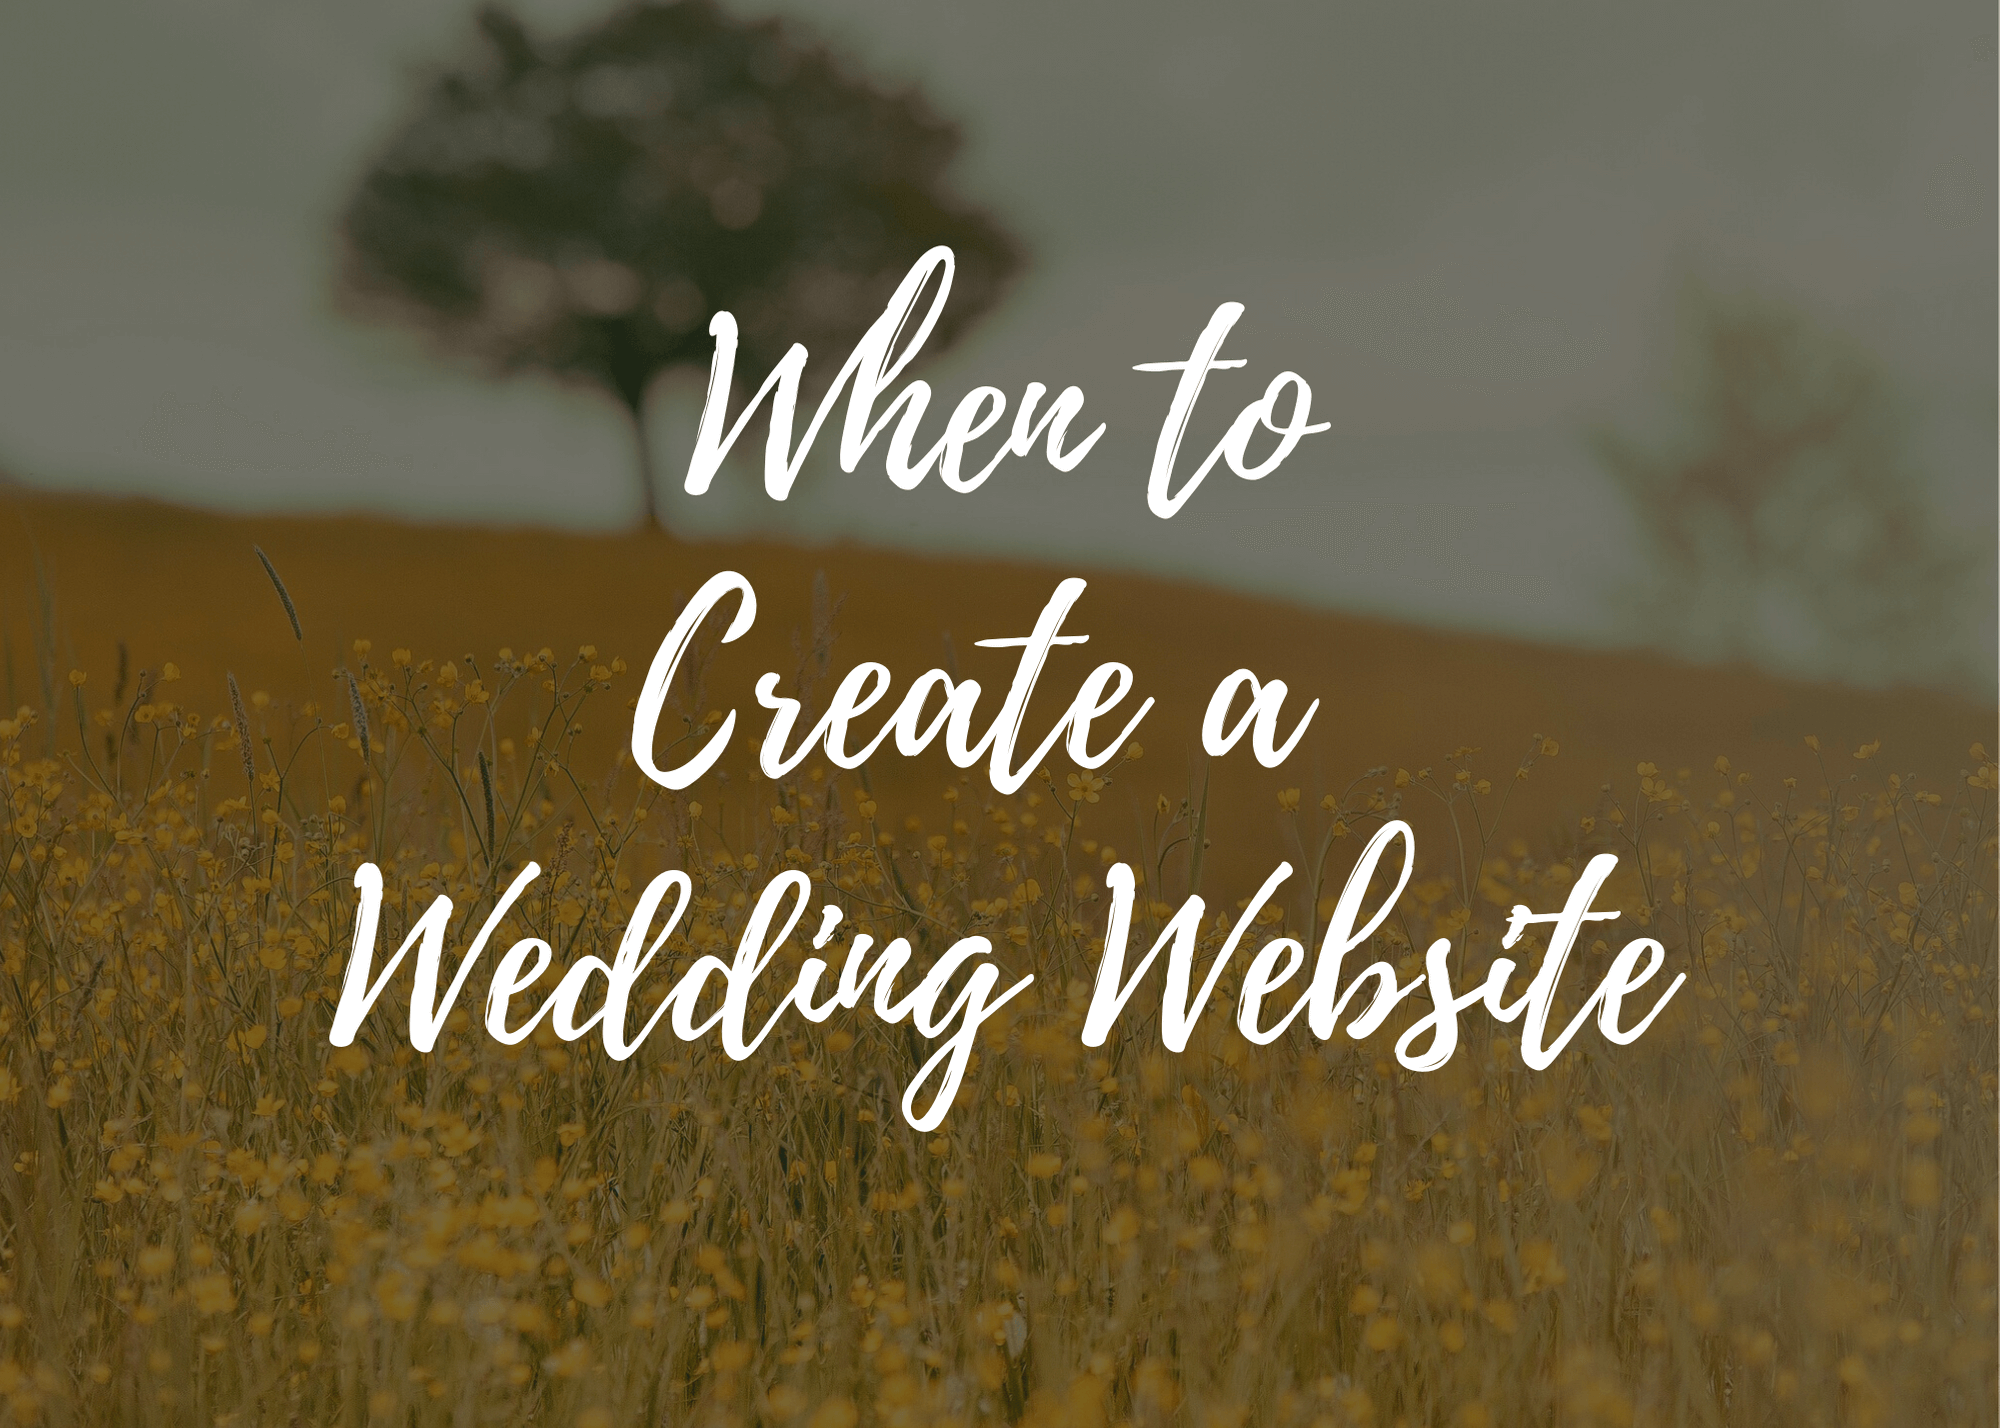 When to Create a Wedding Website text on field background